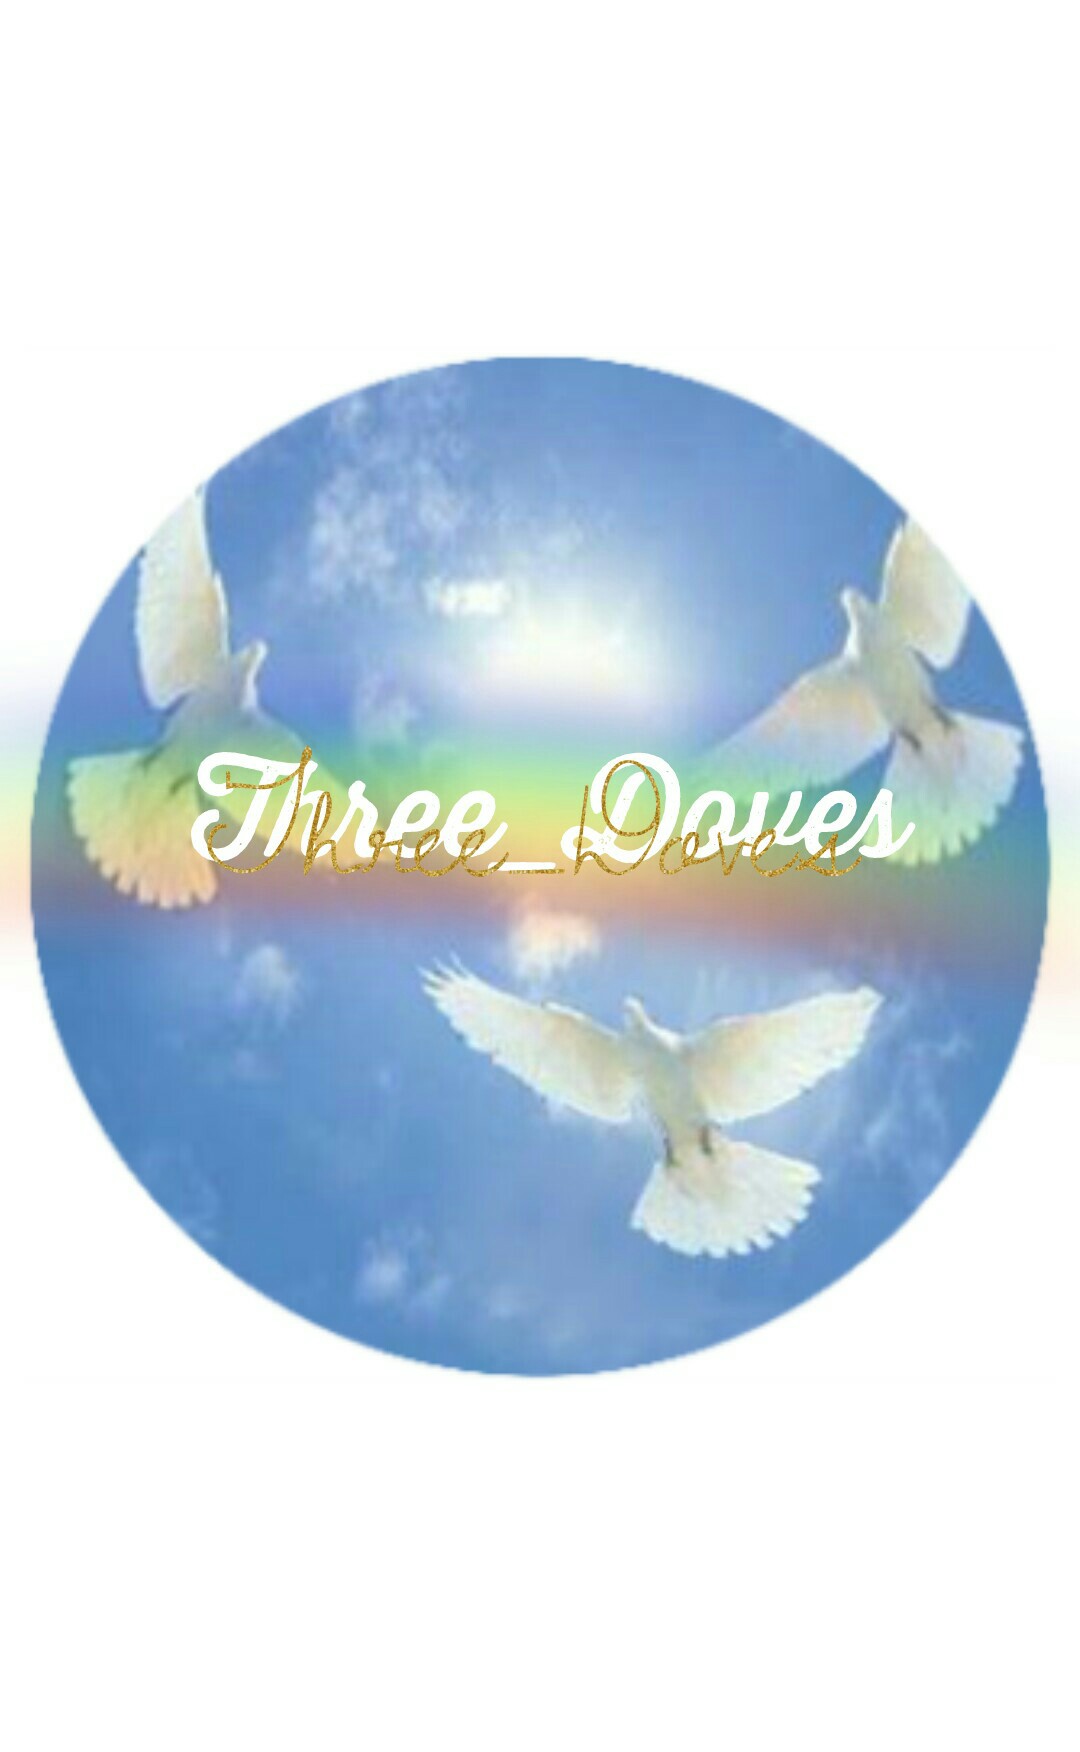 made special for Three_Doves 